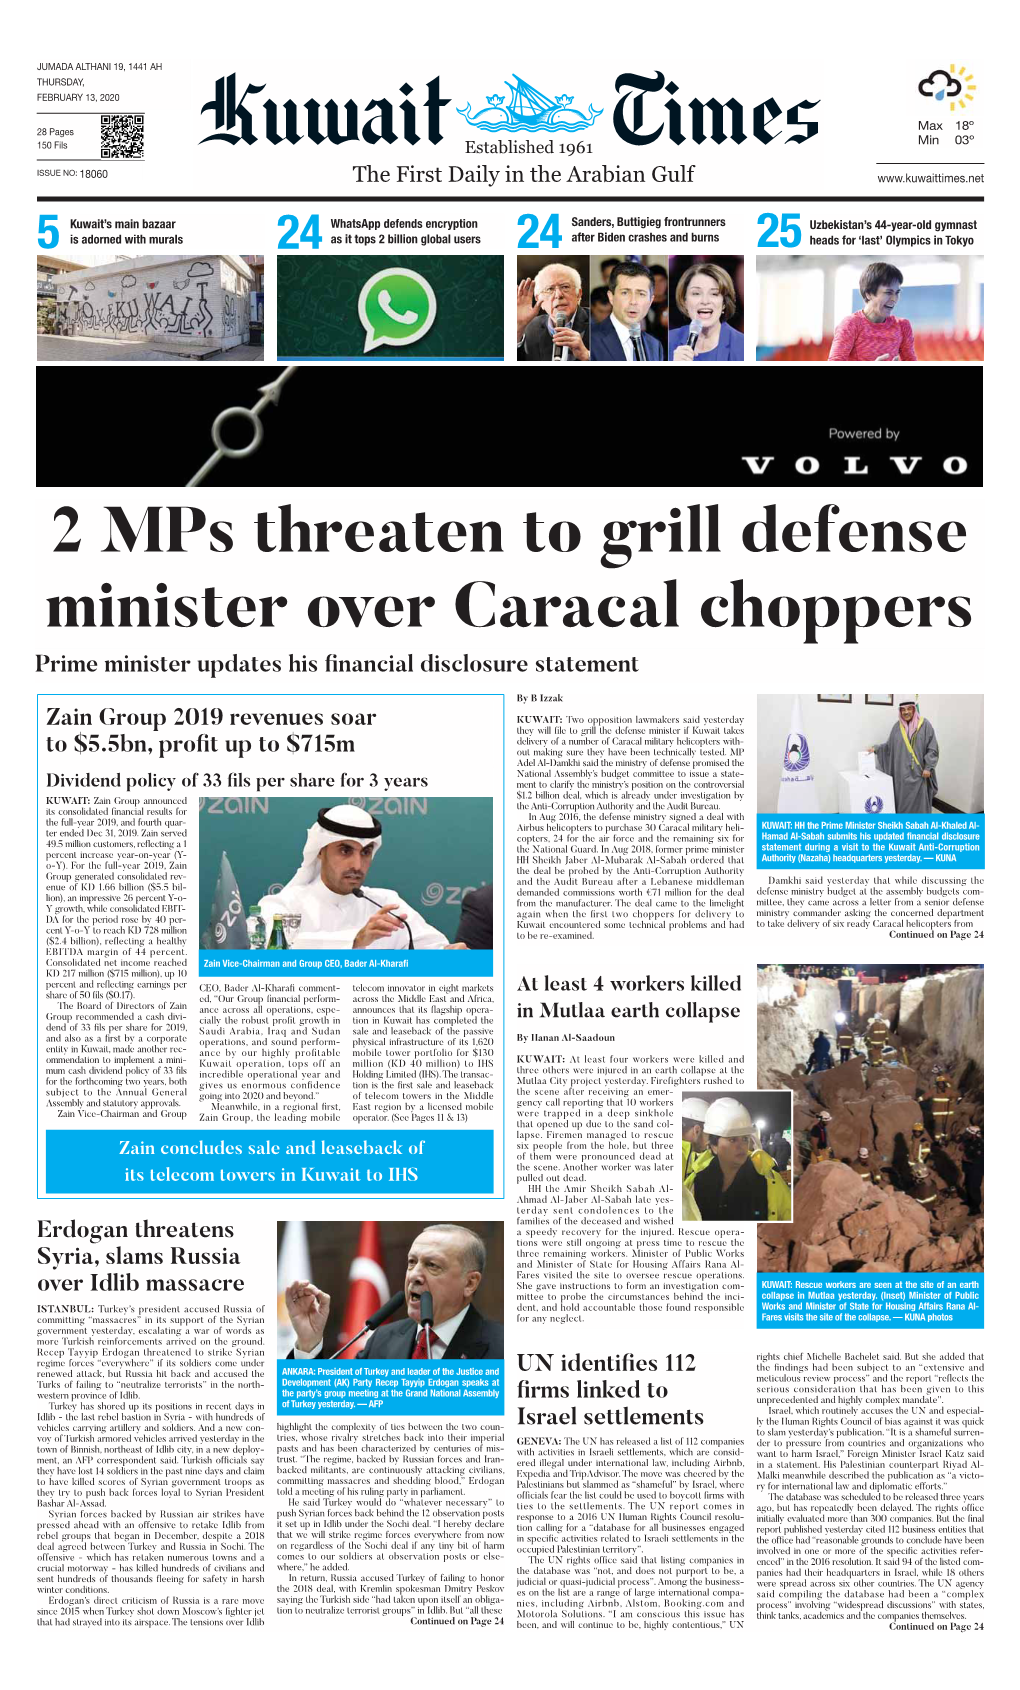 2 Mps Threaten to Grill Defense Minister Over Caracal Choppers Prime Minister Updates His Financial Disclosure Statement